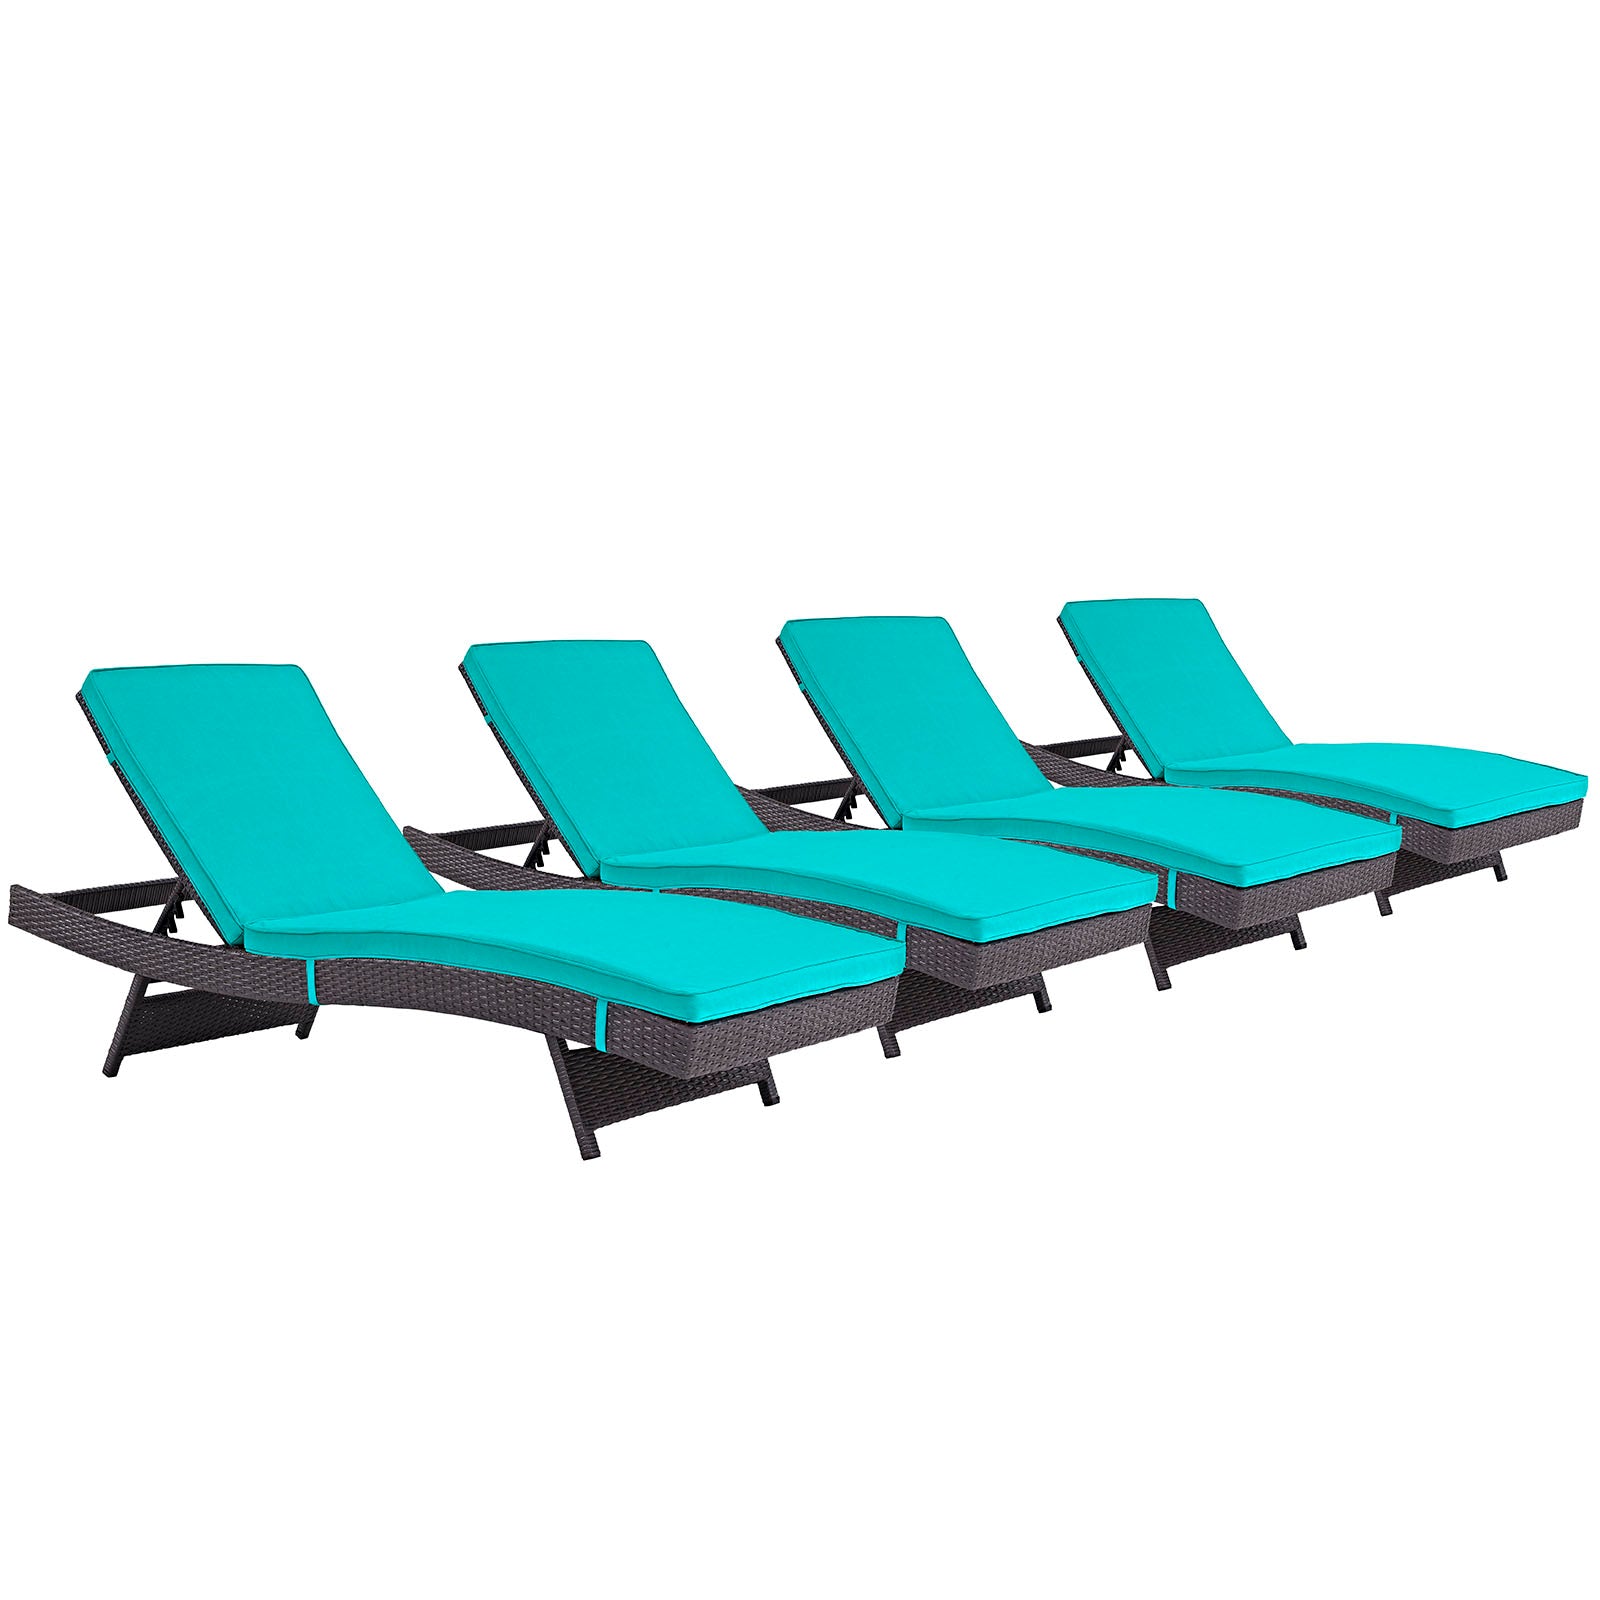 Modway Outdoor Loungers - Convene Chaise Outdoor Patio Set of 4 Espresso Turquoise